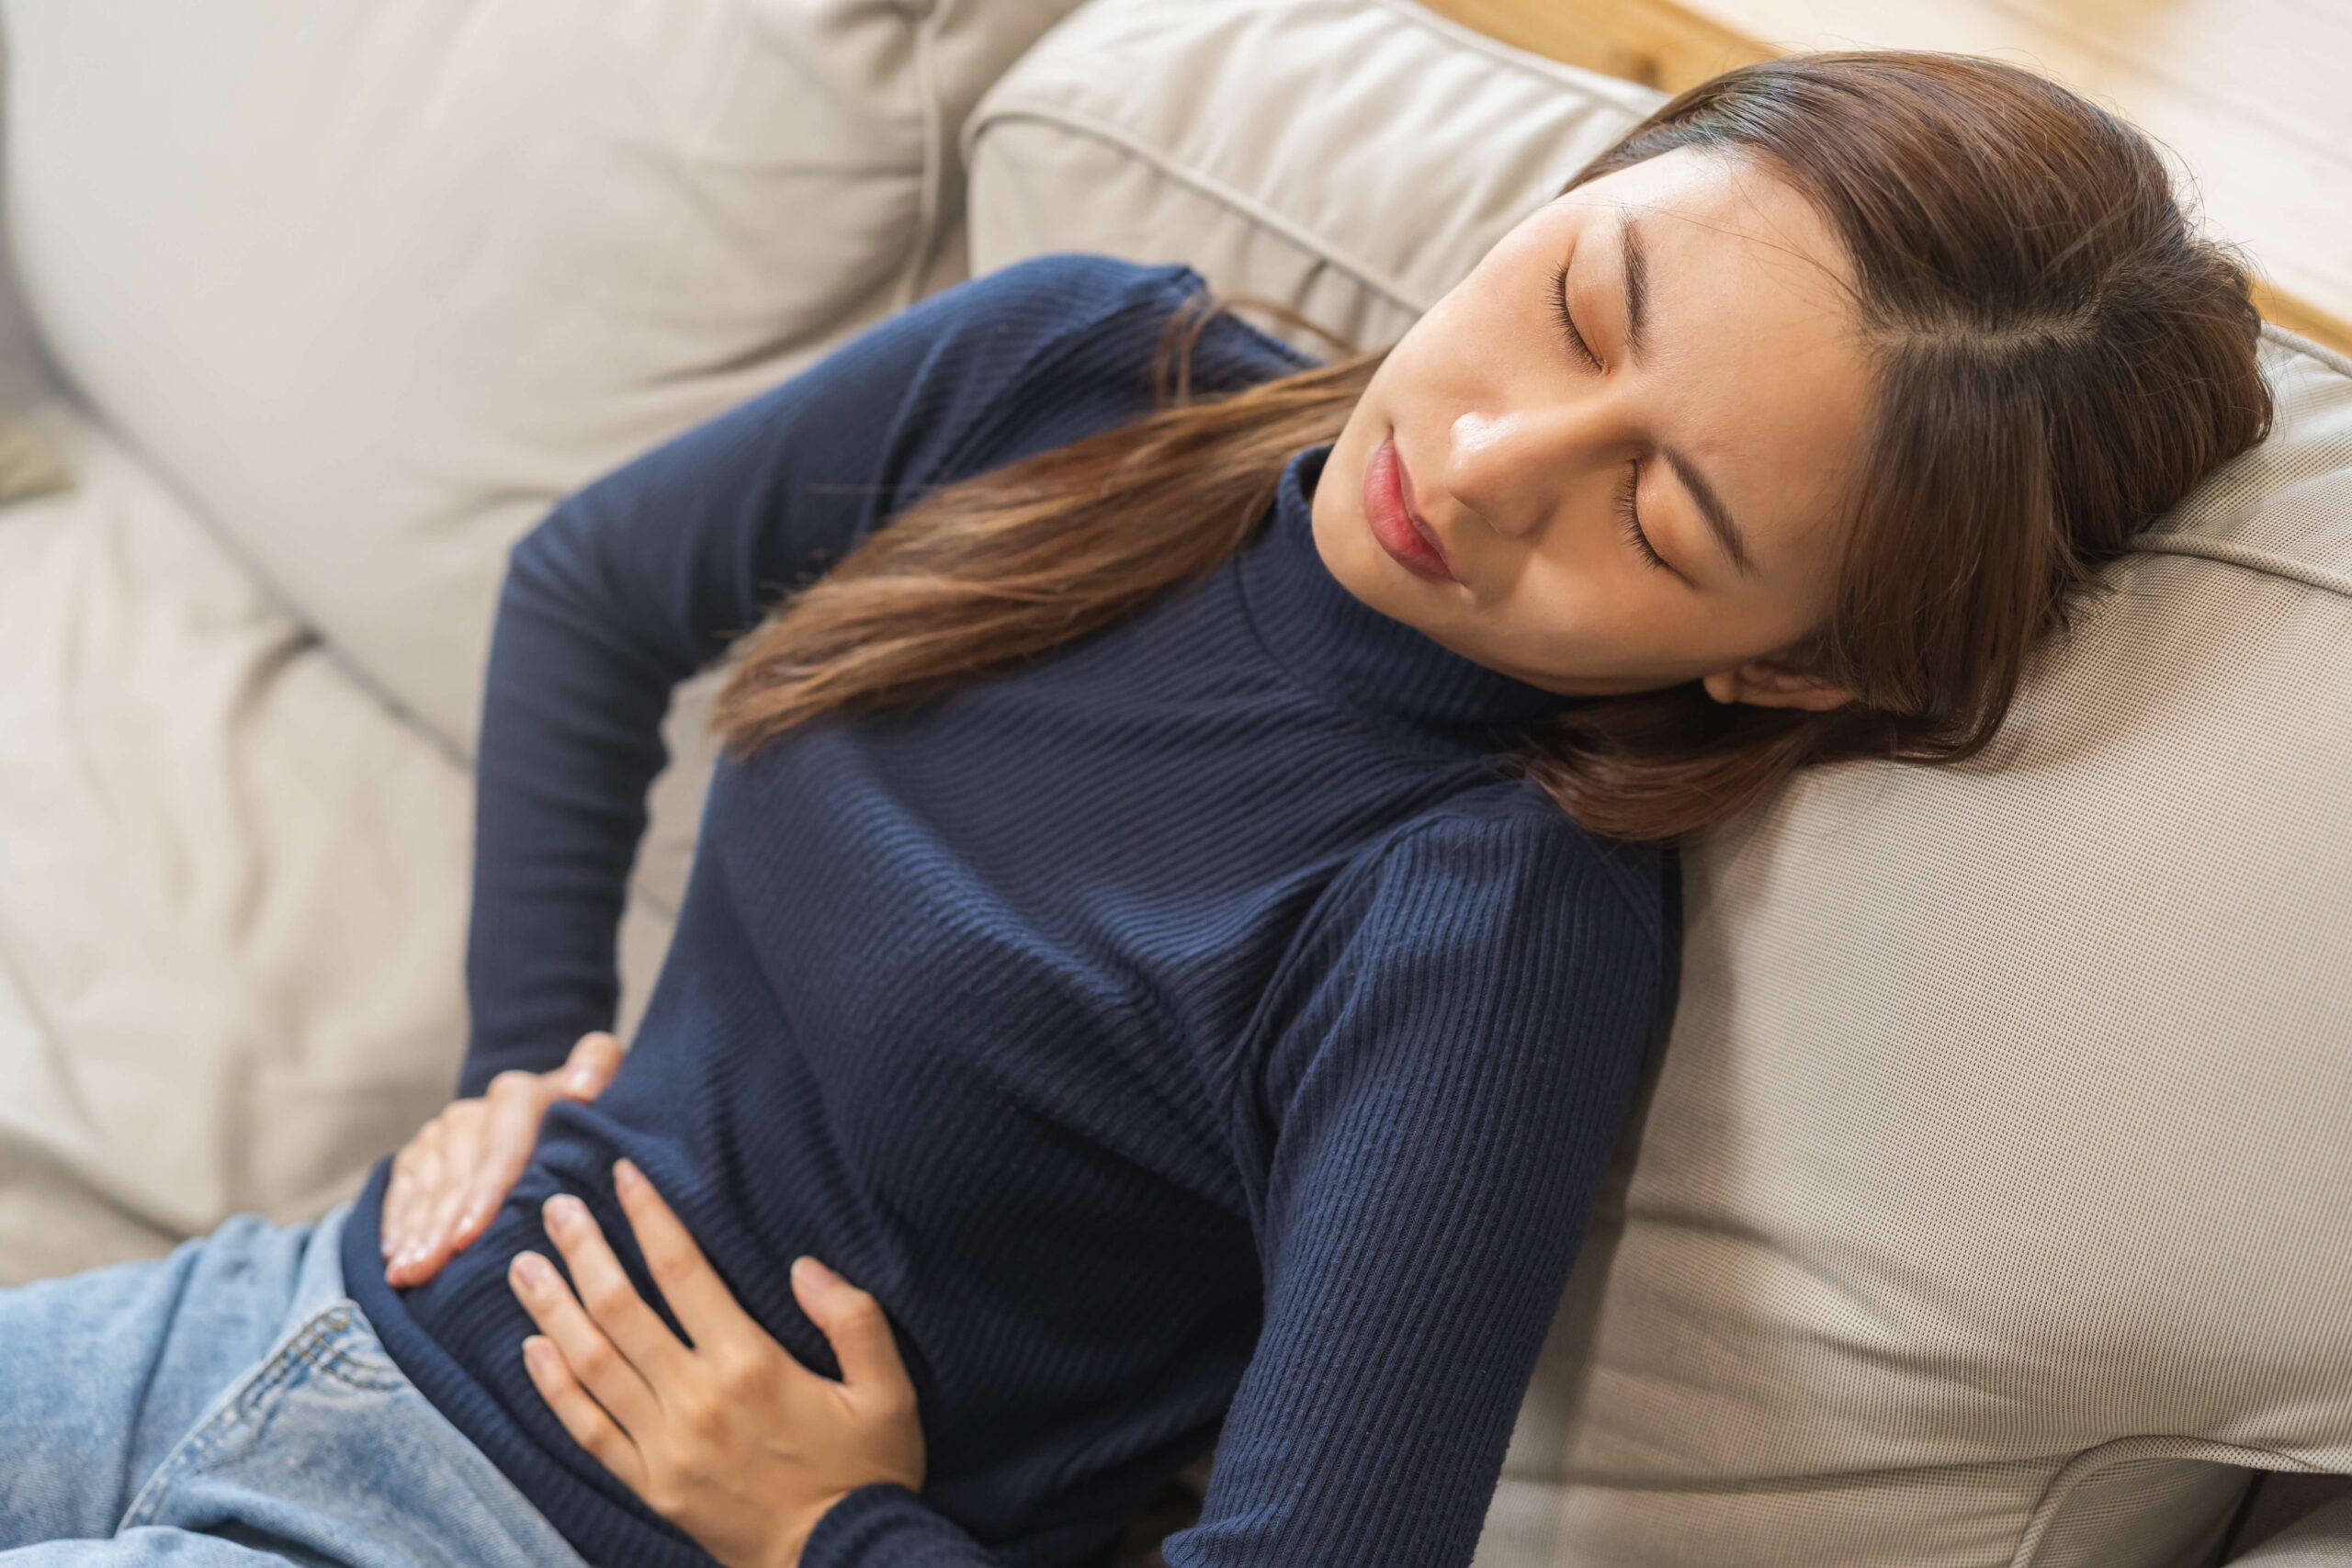 Young female experiencing abdominal pain—she is concerned and unsure if it may be due to miscarriage, implantation bleeding, or just her period